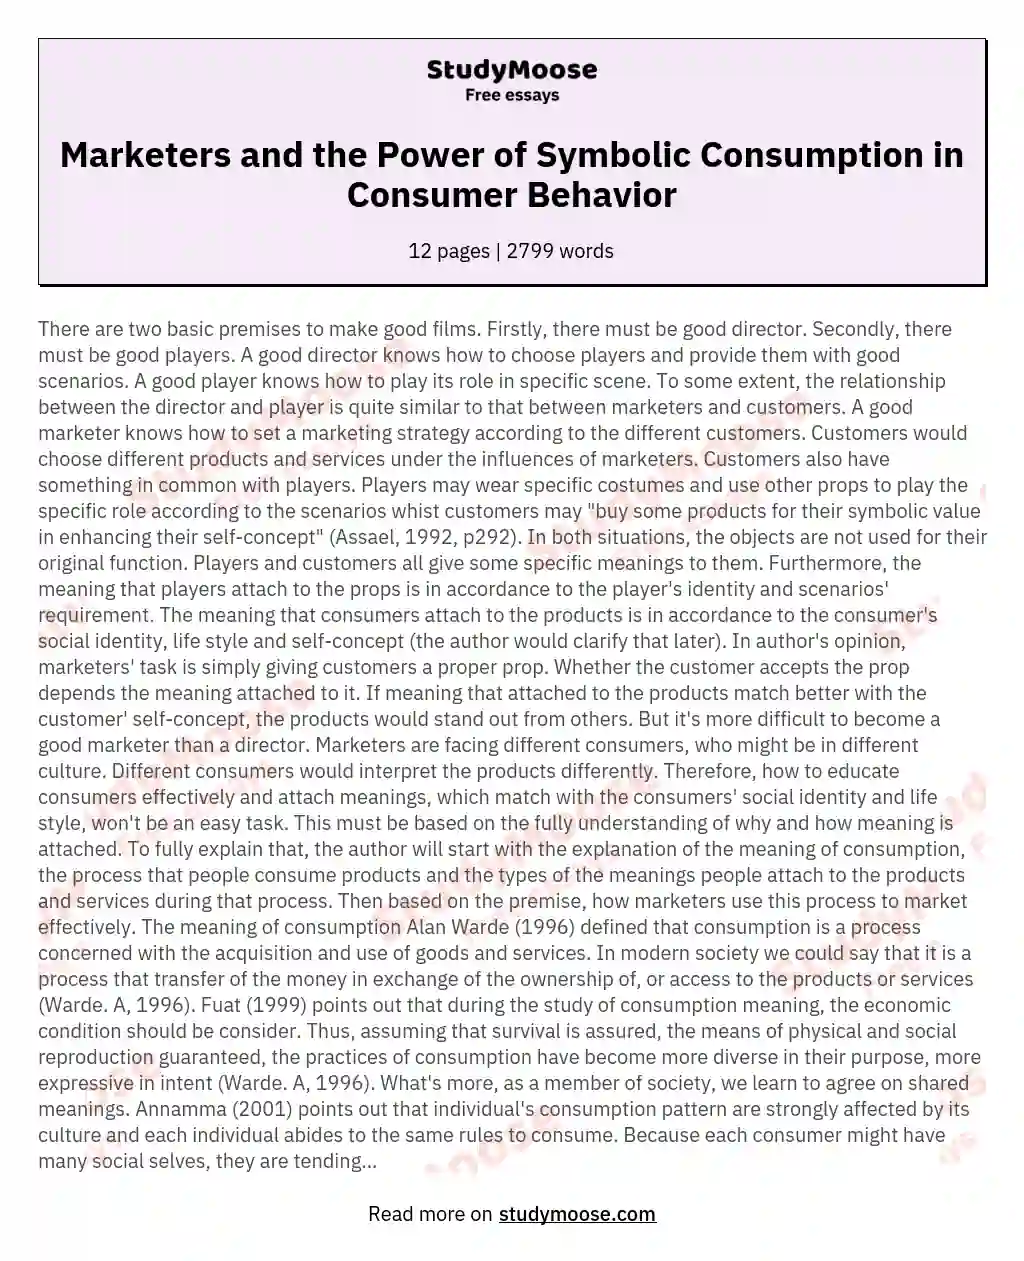 Marketers and the Power of Symbolic Consumption in Consumer Behavior essay